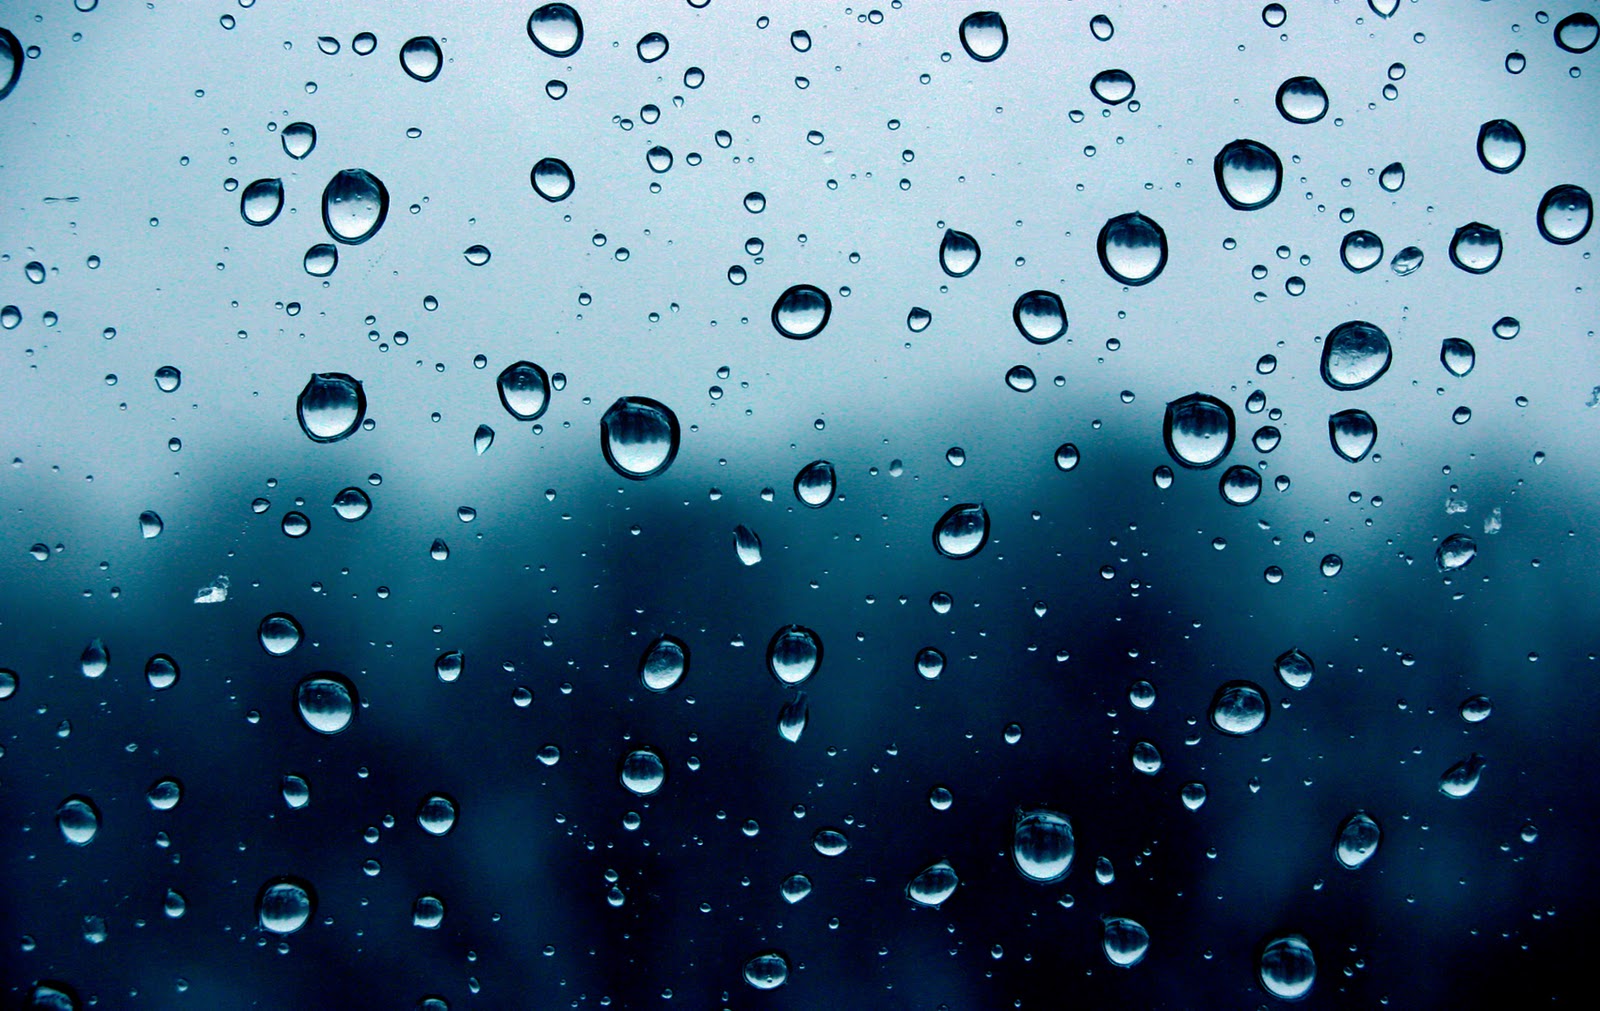 Free download Raindrops Backgrounds image gallery [for